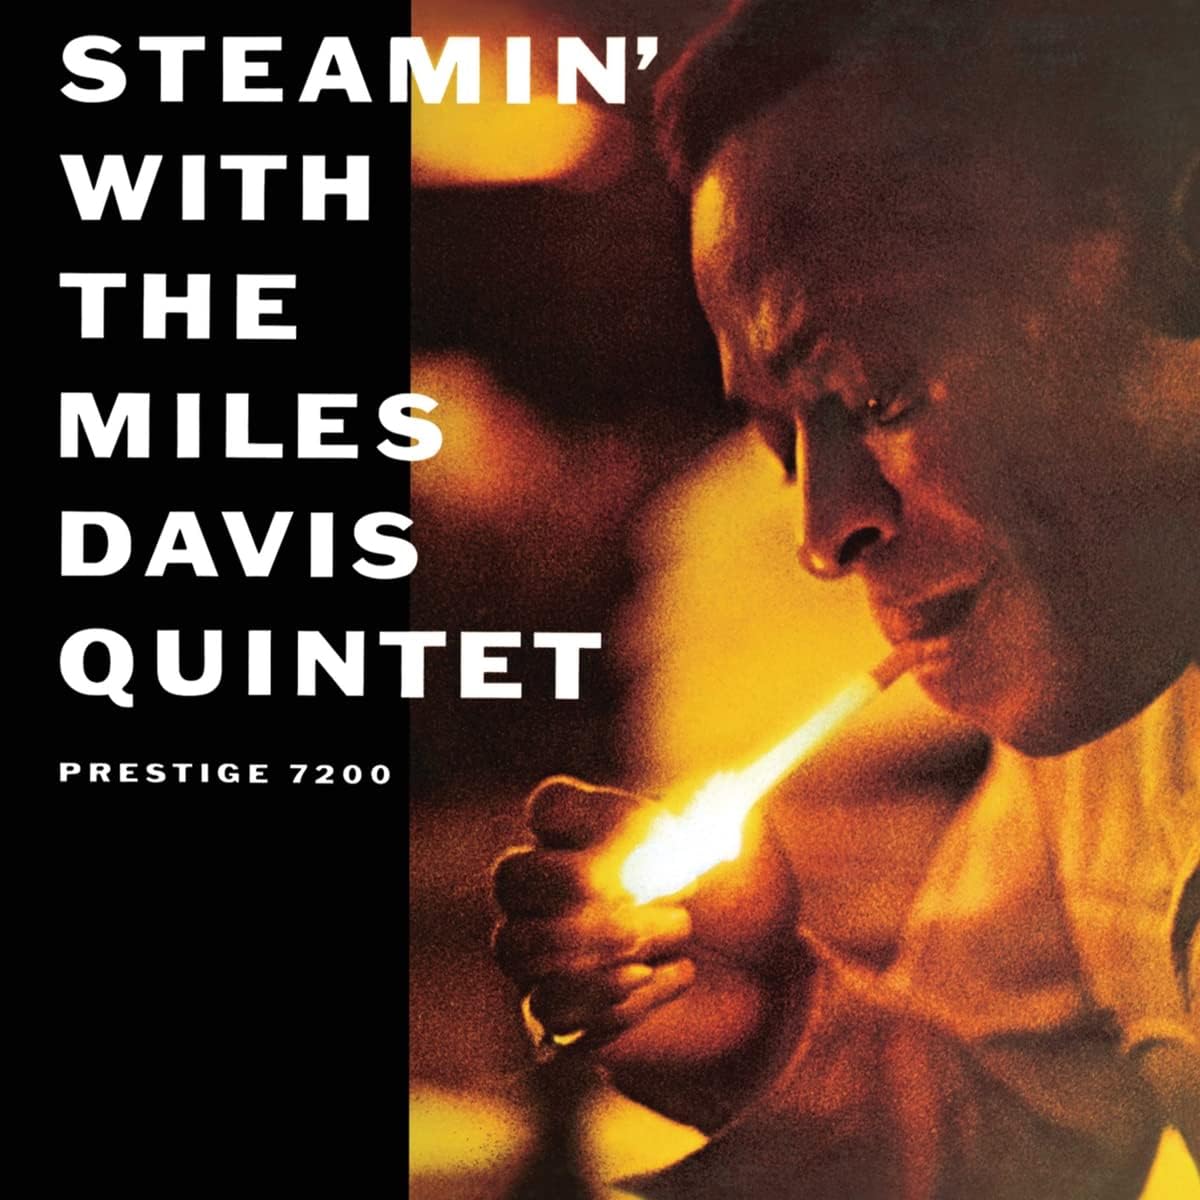 Джаз Universal (Aus) Miles Davis - Steamin’ (Original Jazz Classics) Black Vinyl LP) max roach – with the new orchestra of boston and the so what brass quintet 1 cd